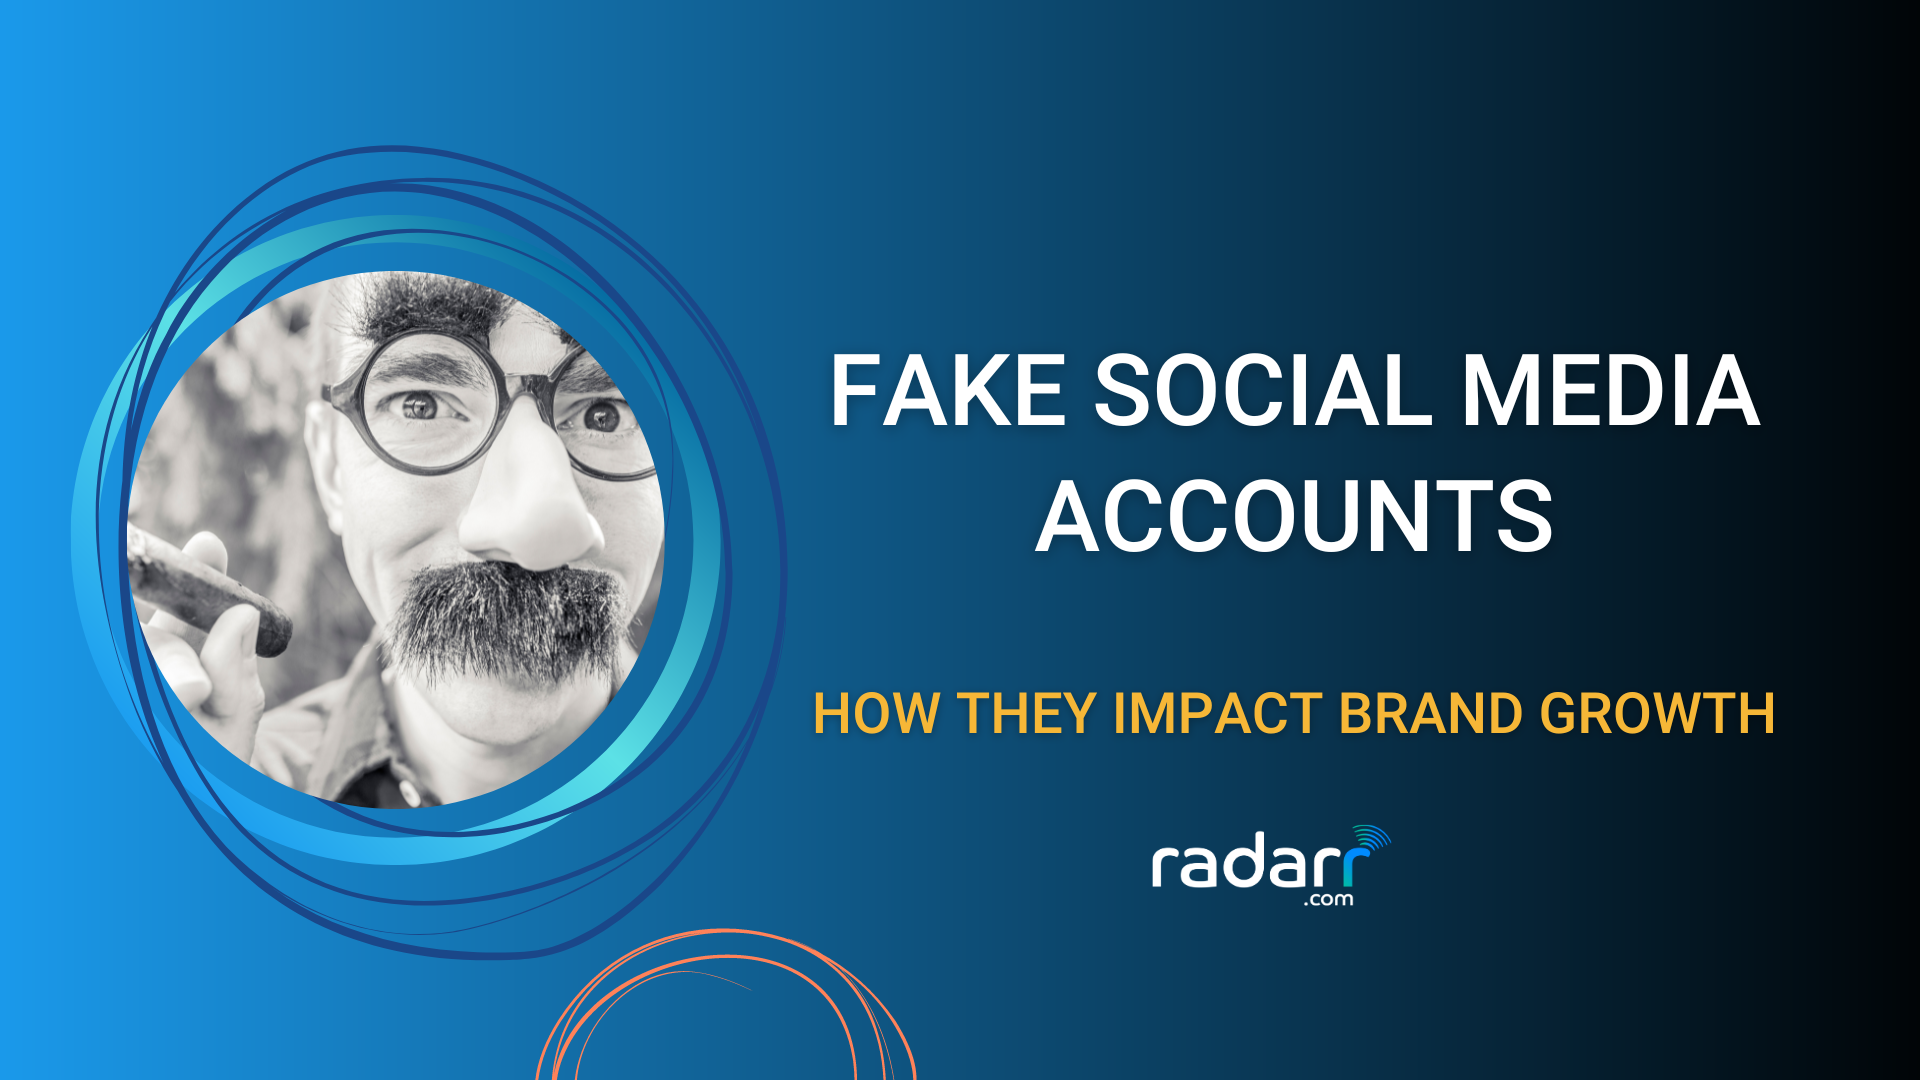 fake social media accounts and how they impact brand growth